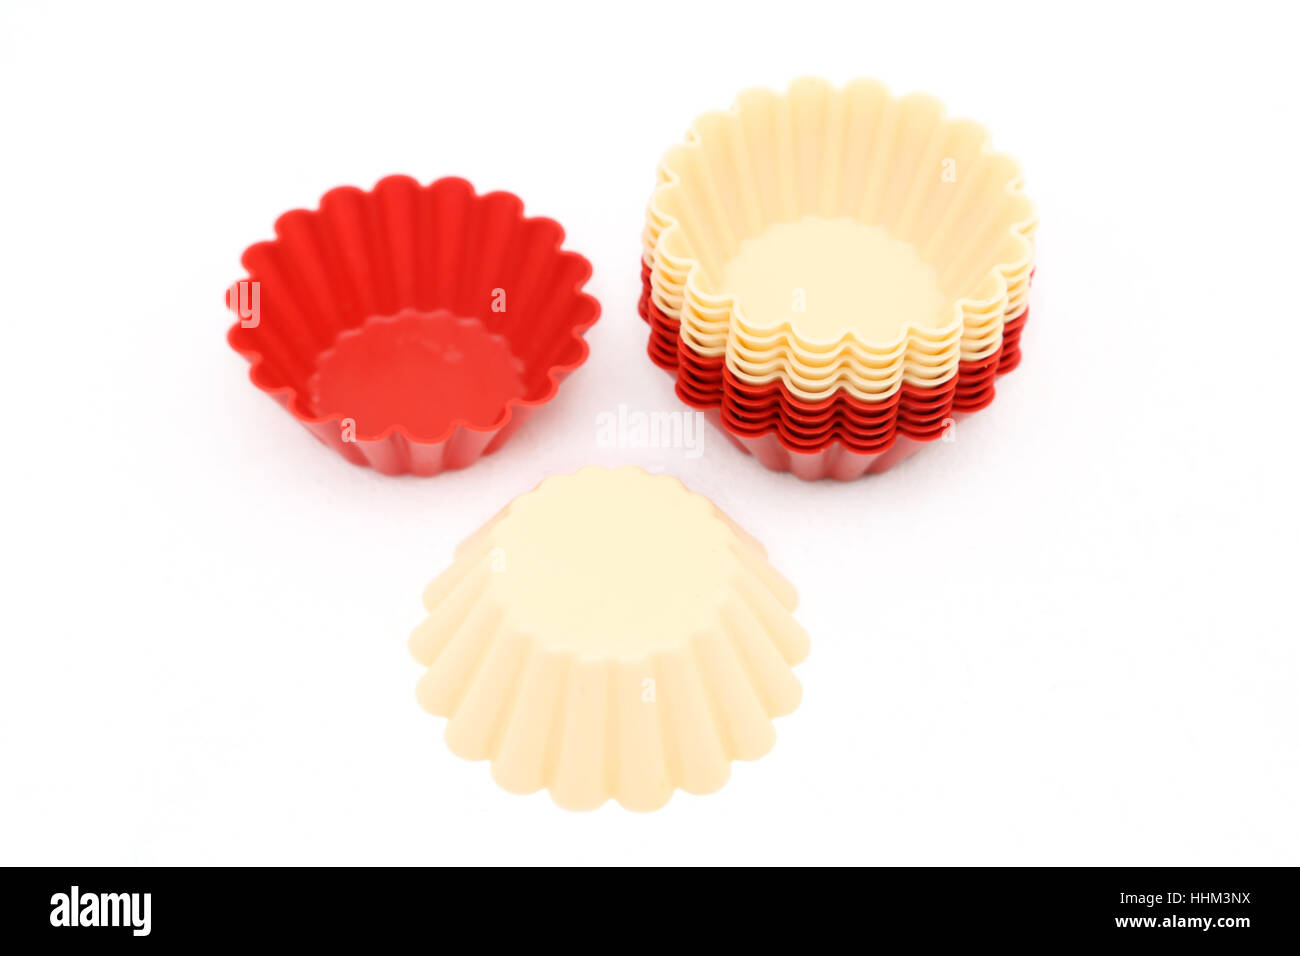 Red And Cream Silicone Cupcake Moulds Stock Photo